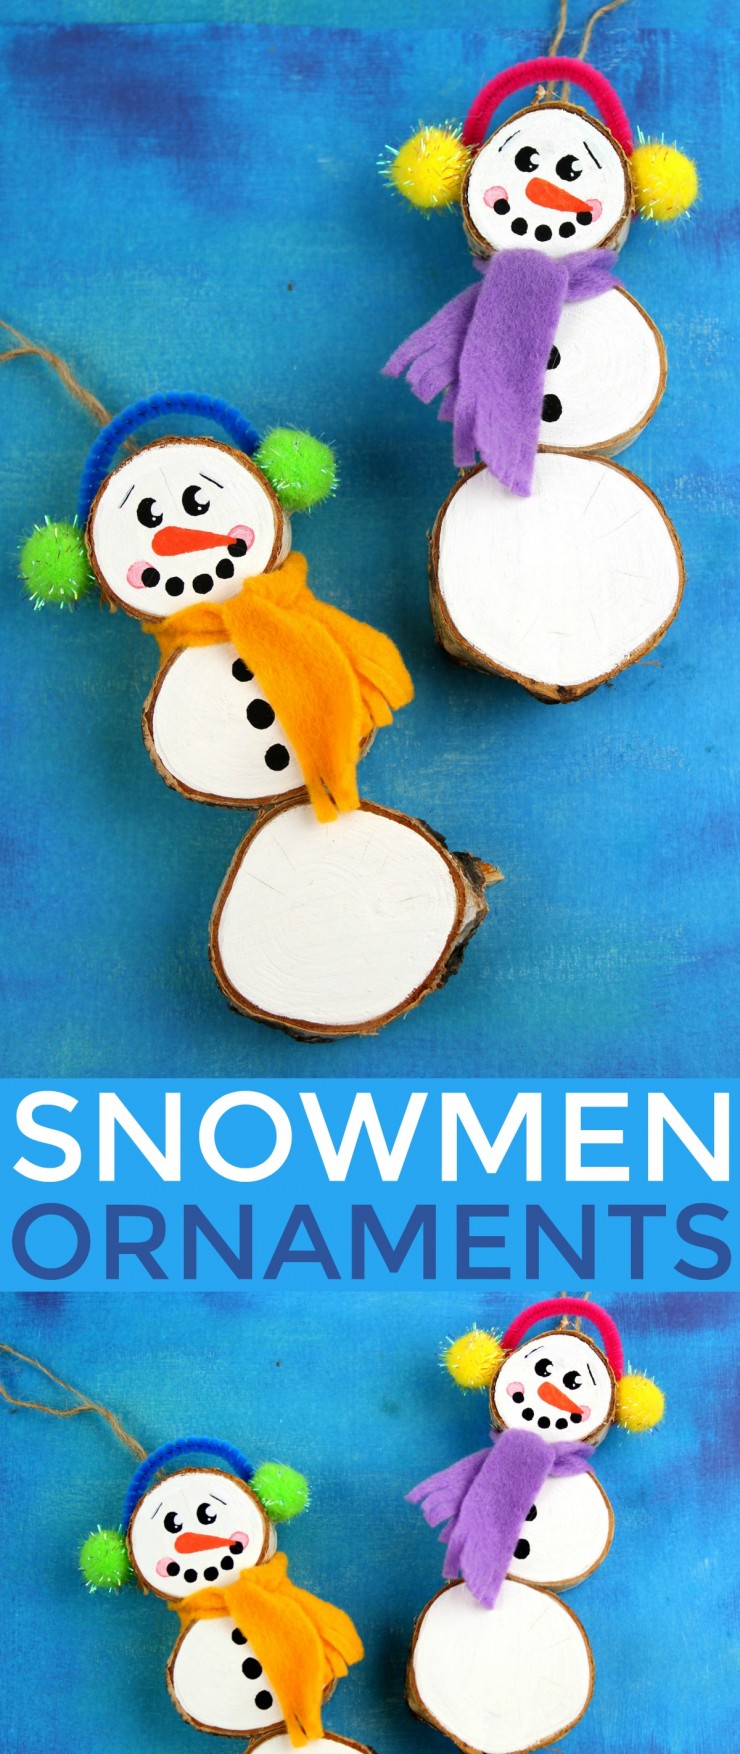 These Wood Slice  Snowmen Ornaments are an adorable and festive holiday craft that make for great keepsake gifts that look great on a Christmas tree.  We had so much fun making these Christmas ornaments!